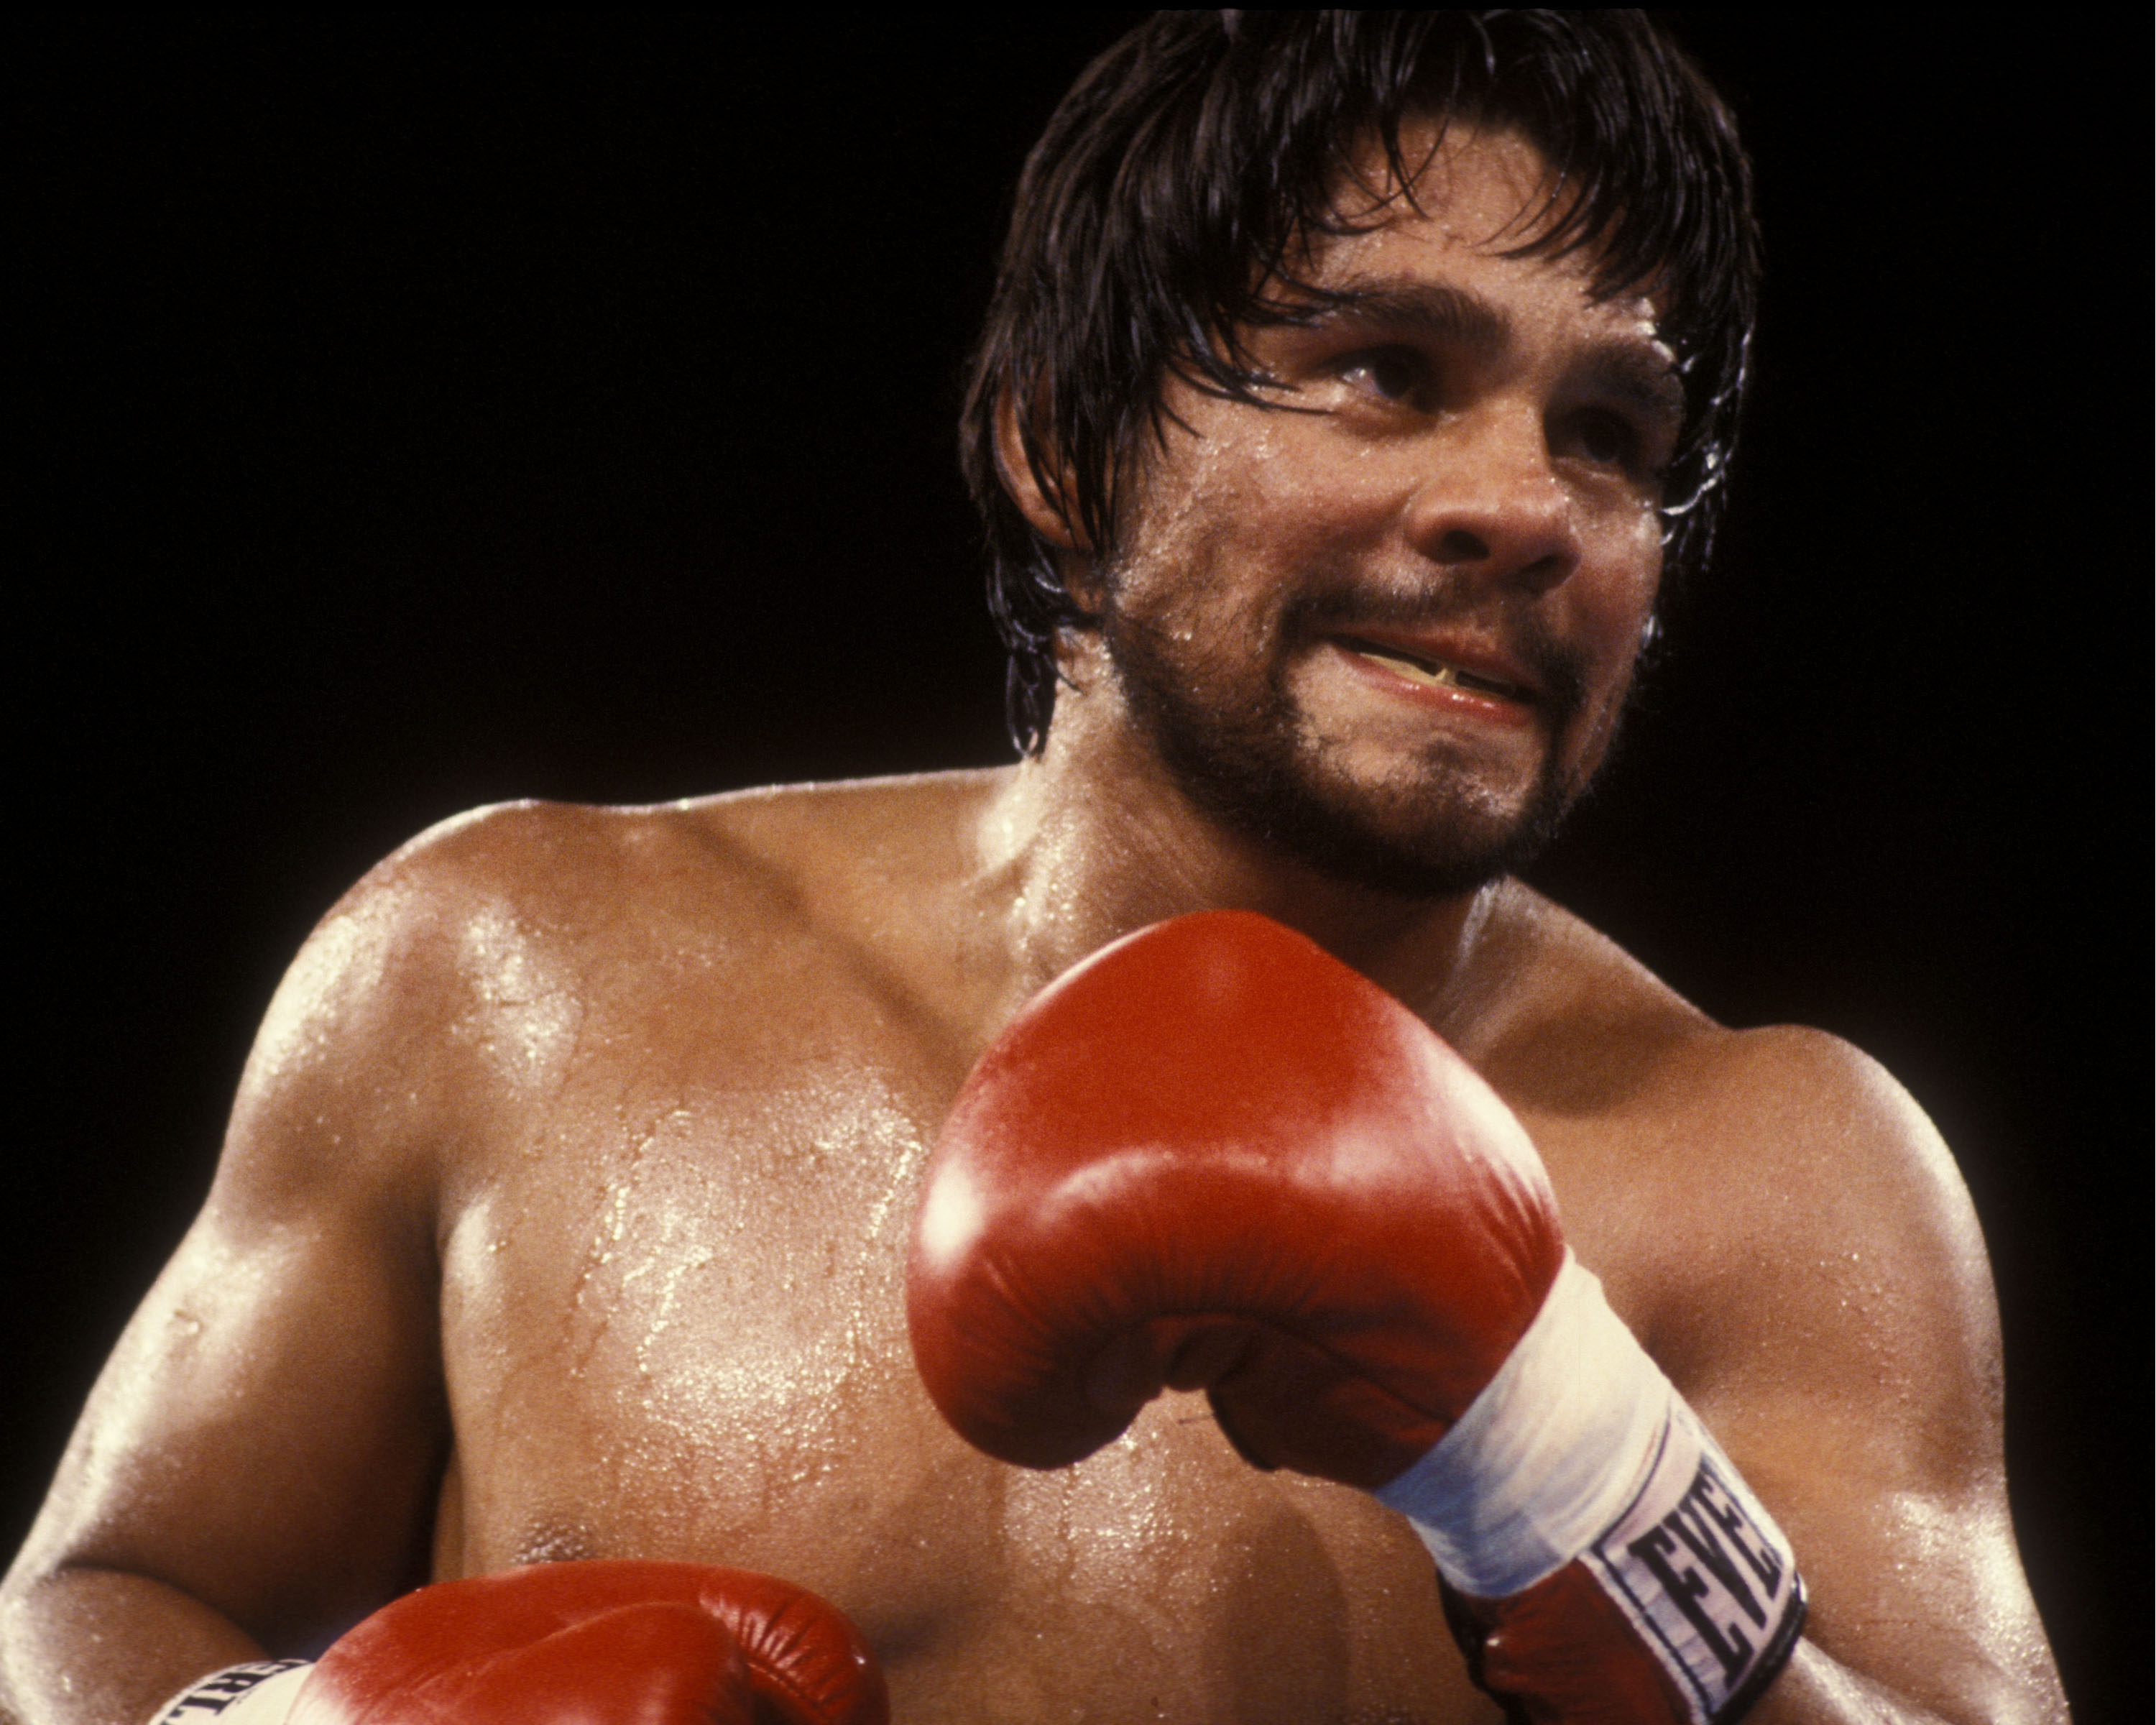 Boxer Roberto Duran sets to unload a punch during a 1983 fight at the Orange Bowl, Miami, Florida. (Photo by Al Messerschmidt/WireImage)